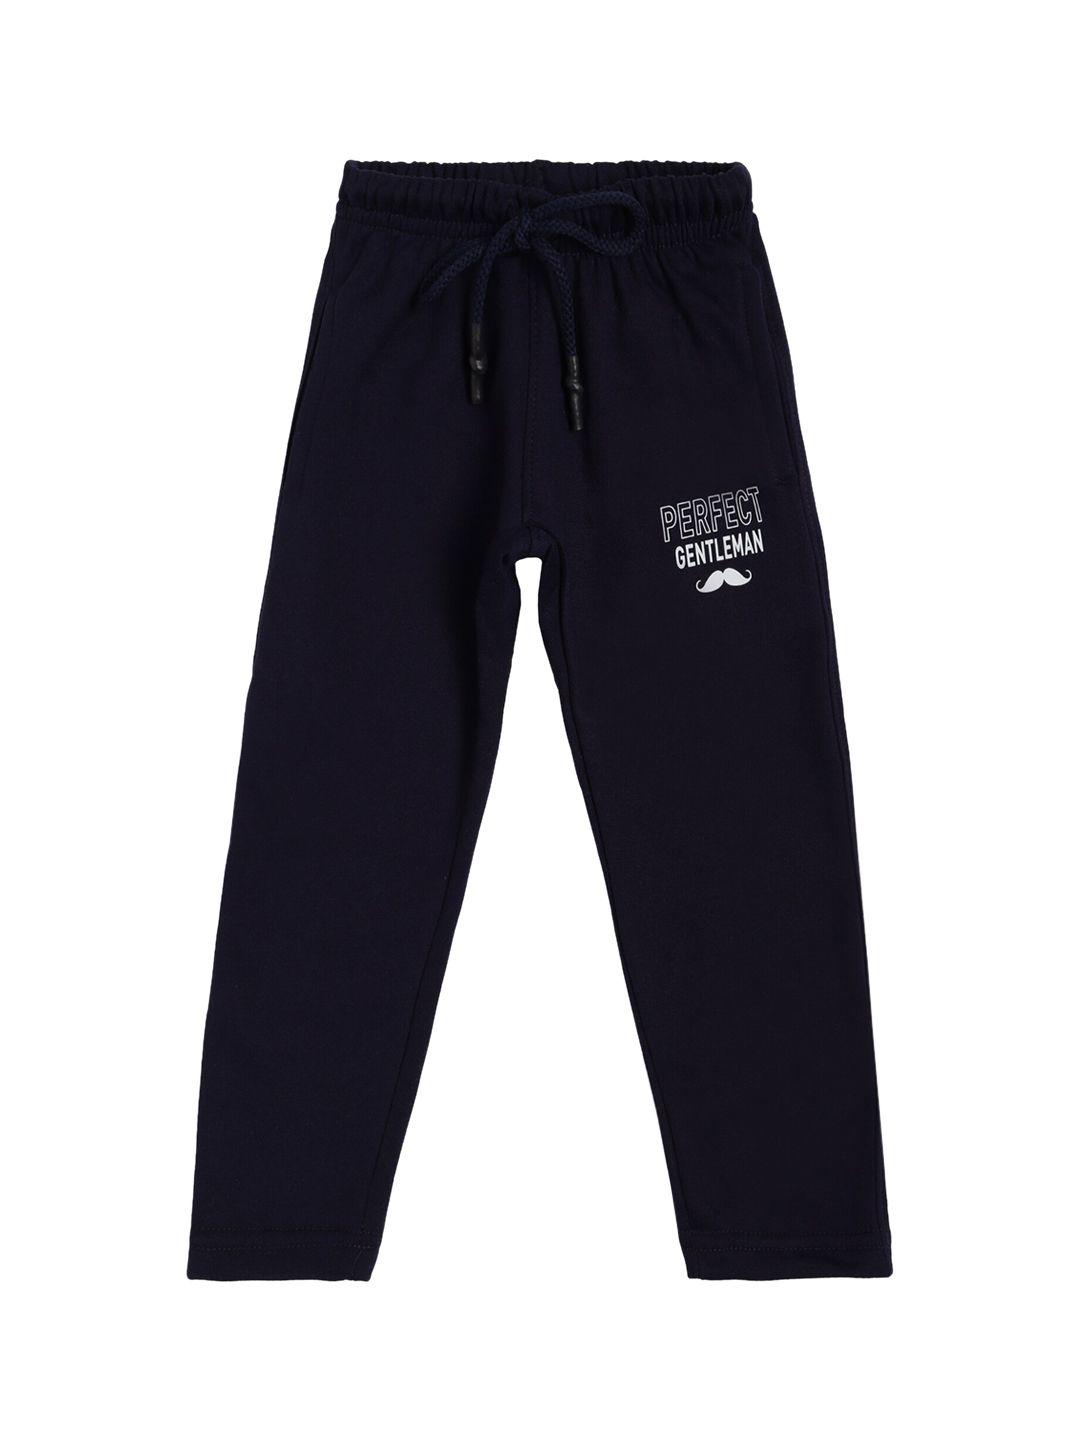 dyca boys navy blue solid cotton track pants